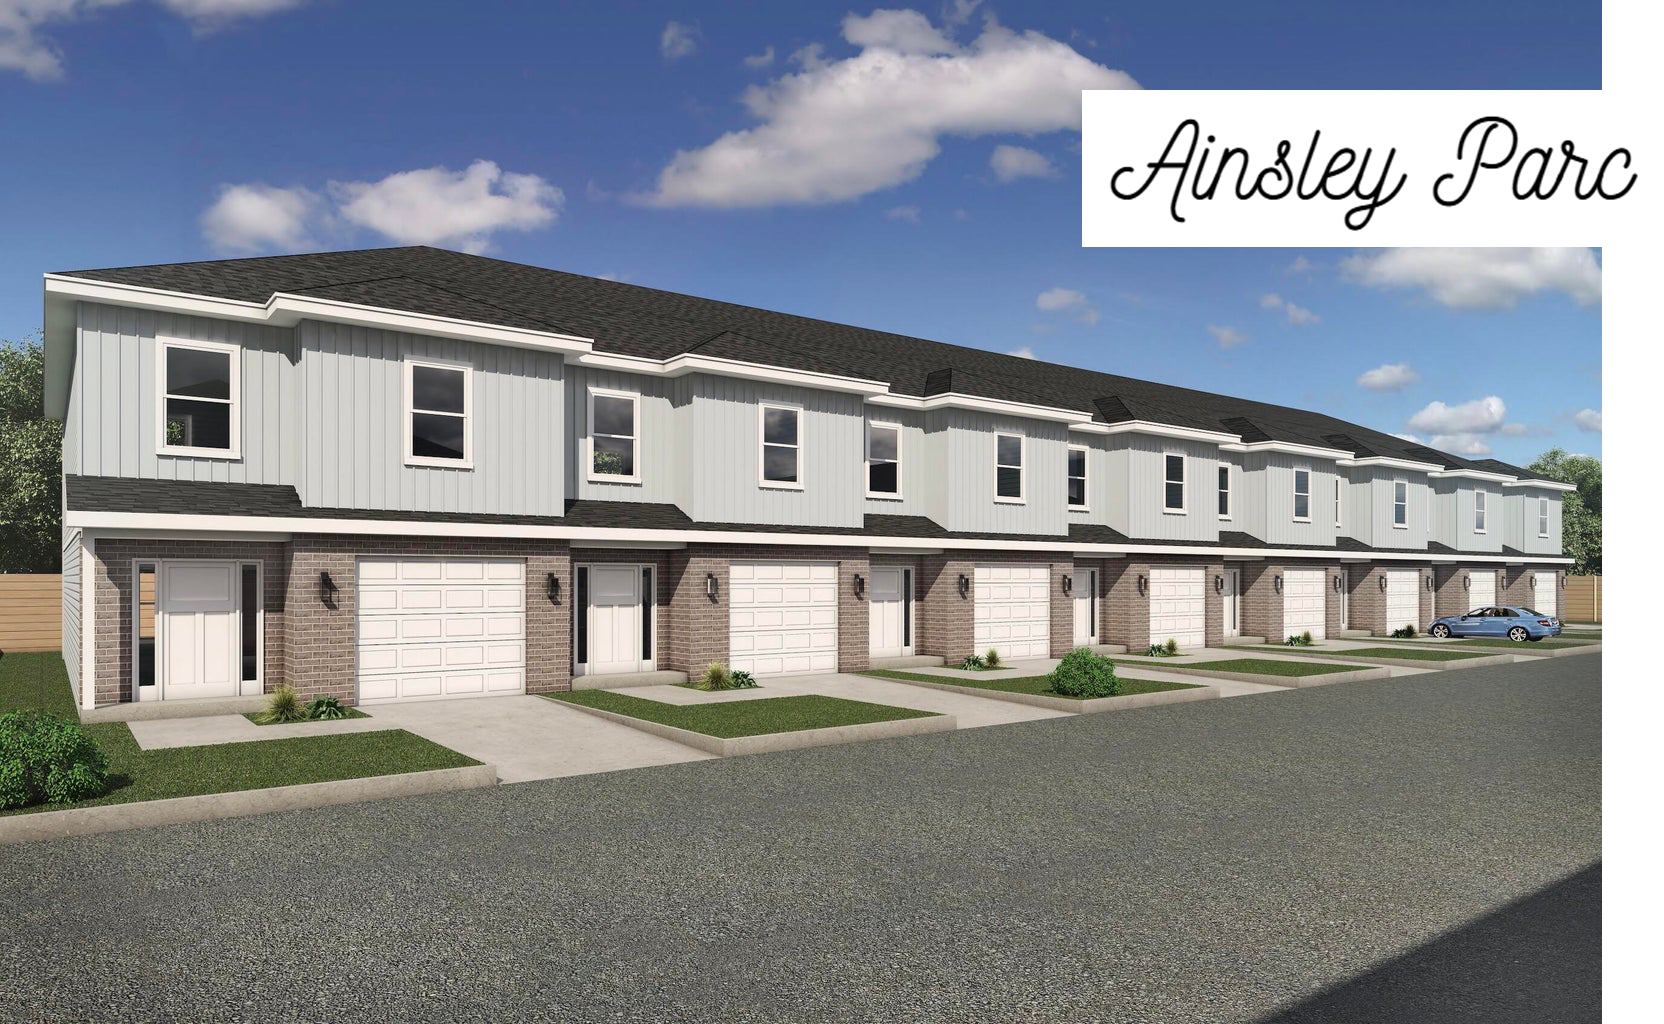 Ainsley Parc - front rendering with title